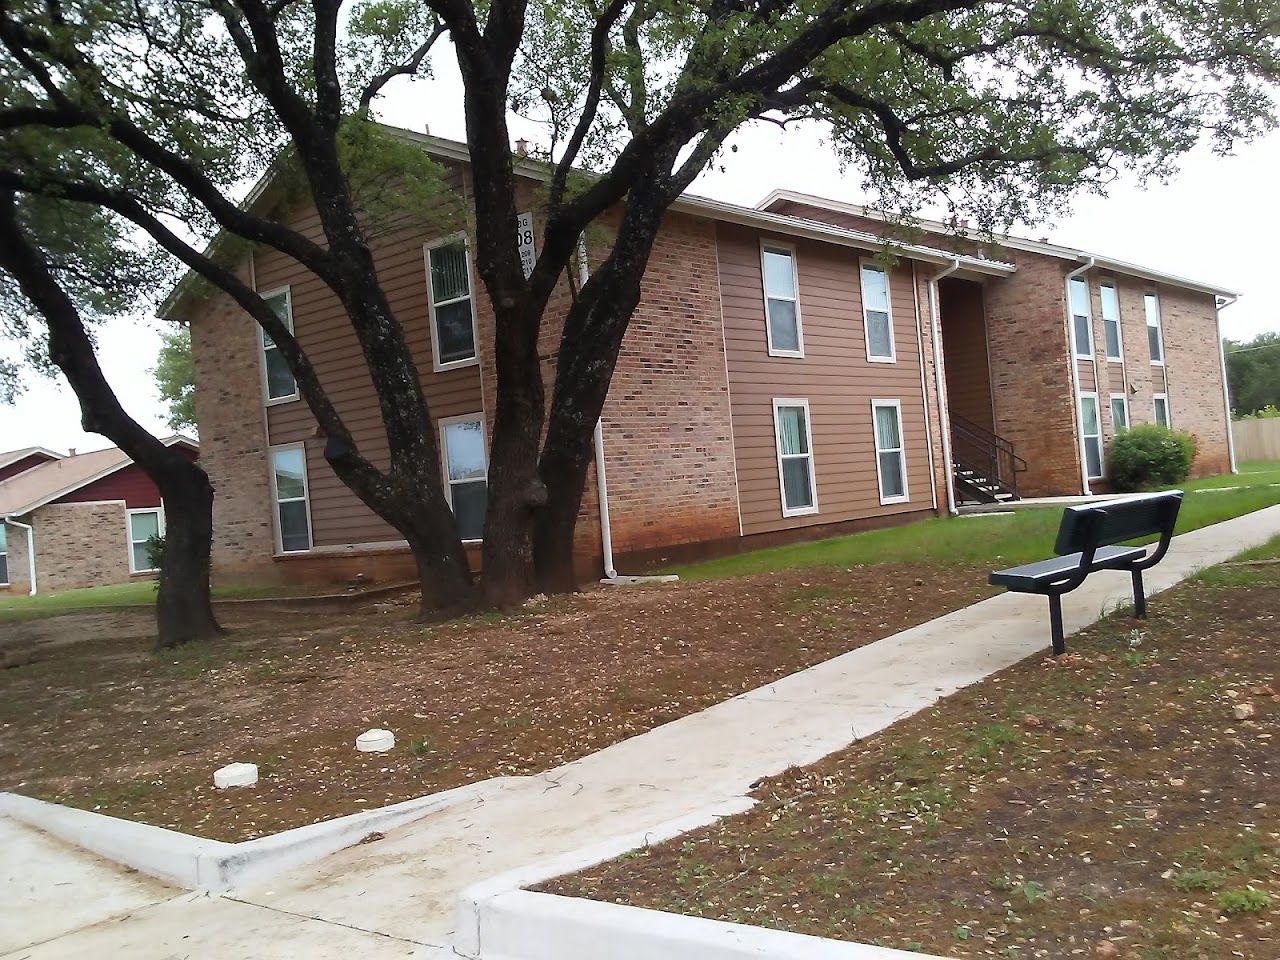 Photo of GEORGETOWN SQUARE APARTMENTS at 206 ROYAL DR. GEORGETOWN, TX 78626